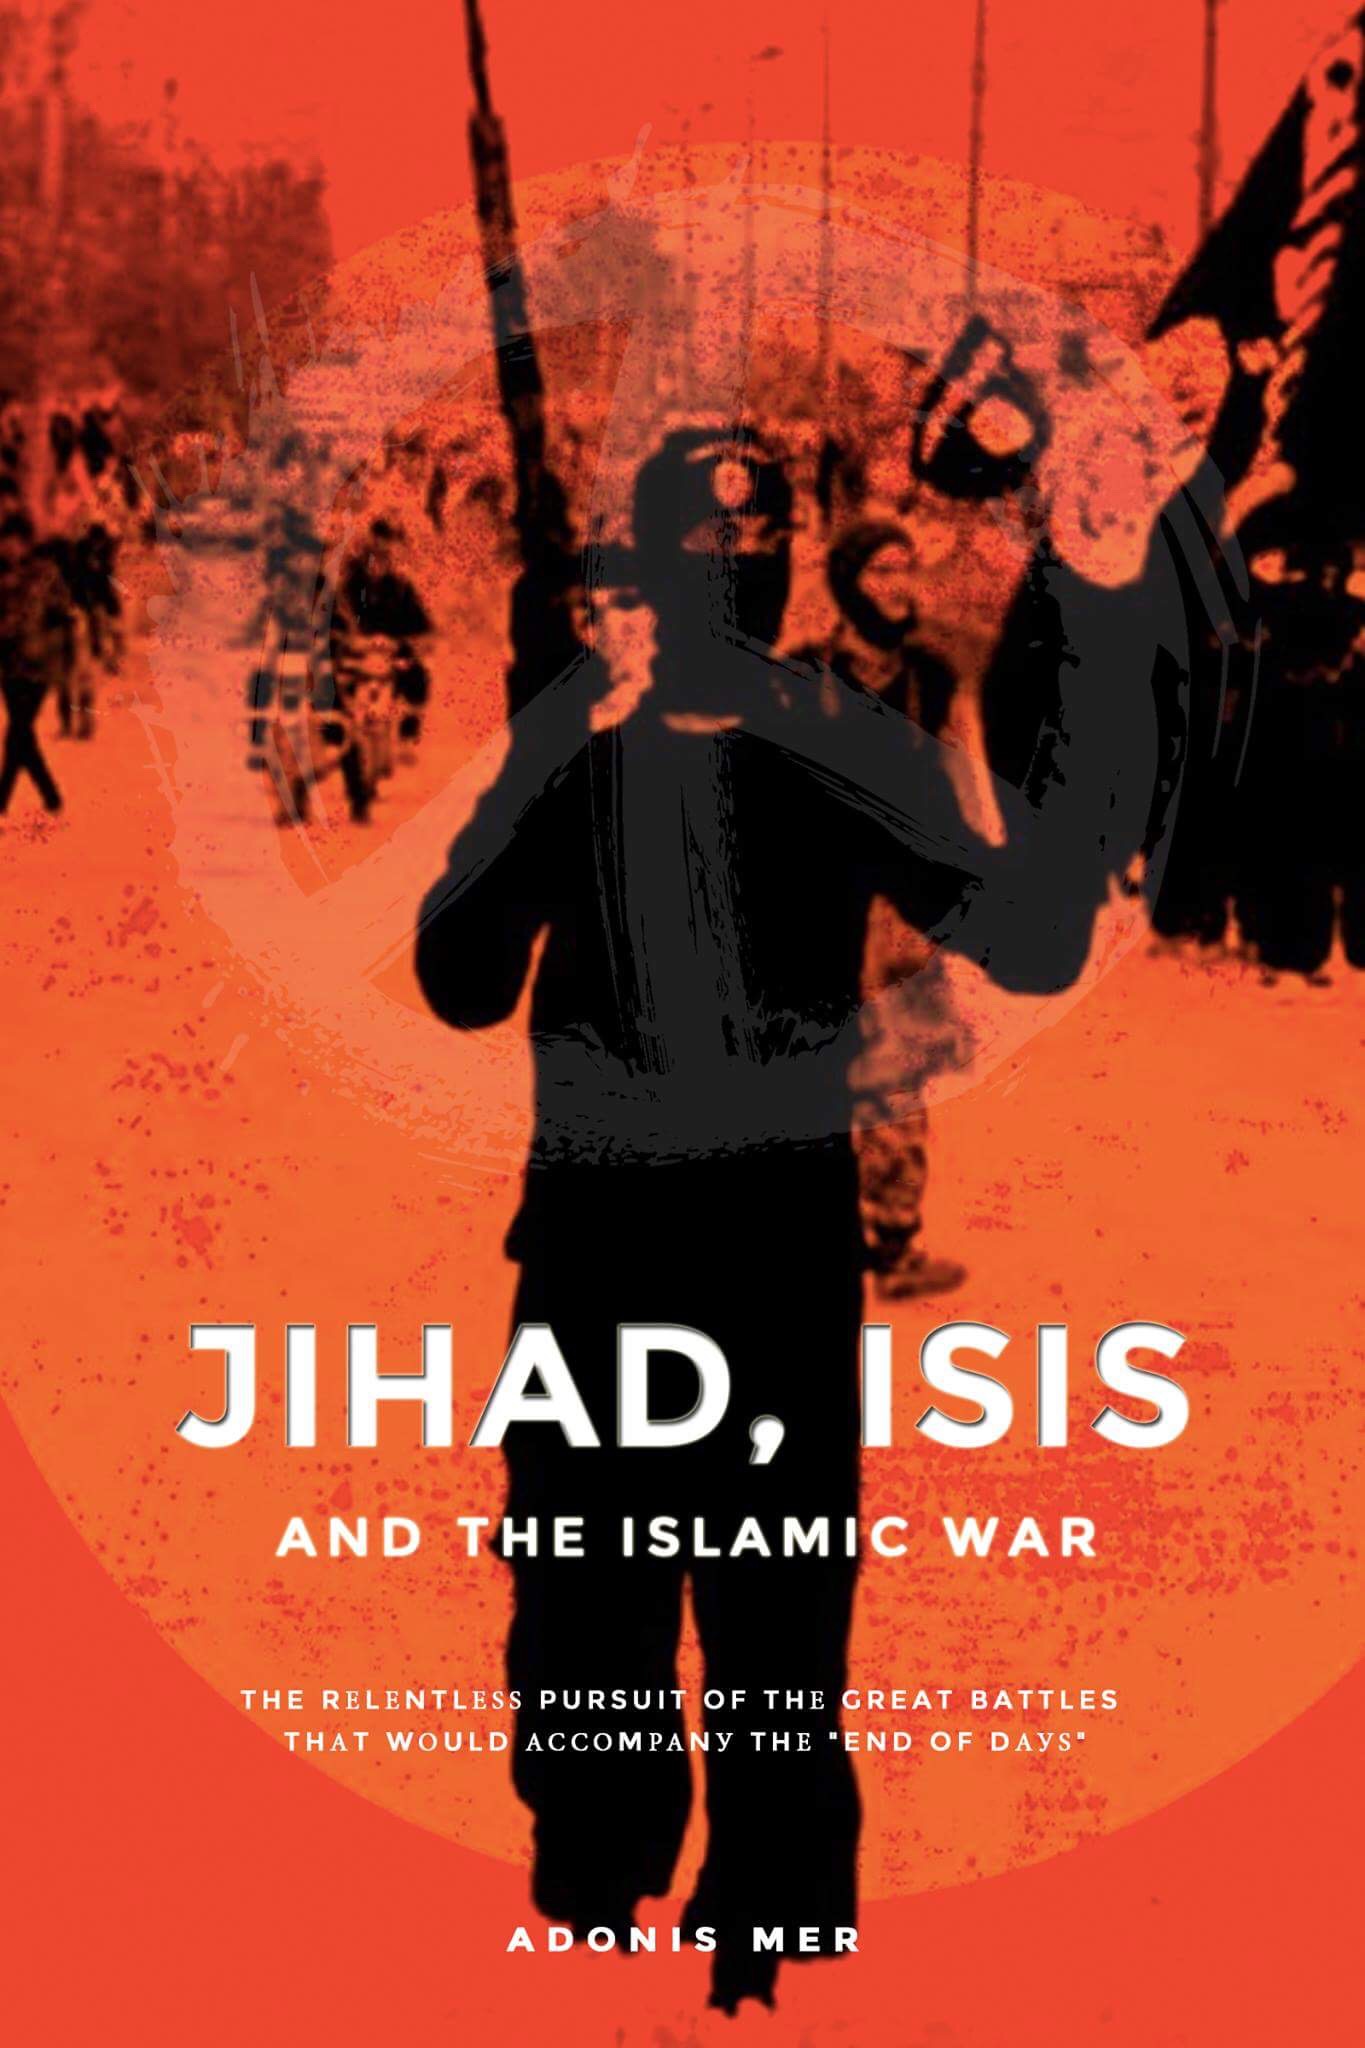 FREE: Jihad, ISIS and The Islamic War: The Relentless Pursuit Of The Great Battles That Would Accompany The “End Of Days” by Adonis Mer